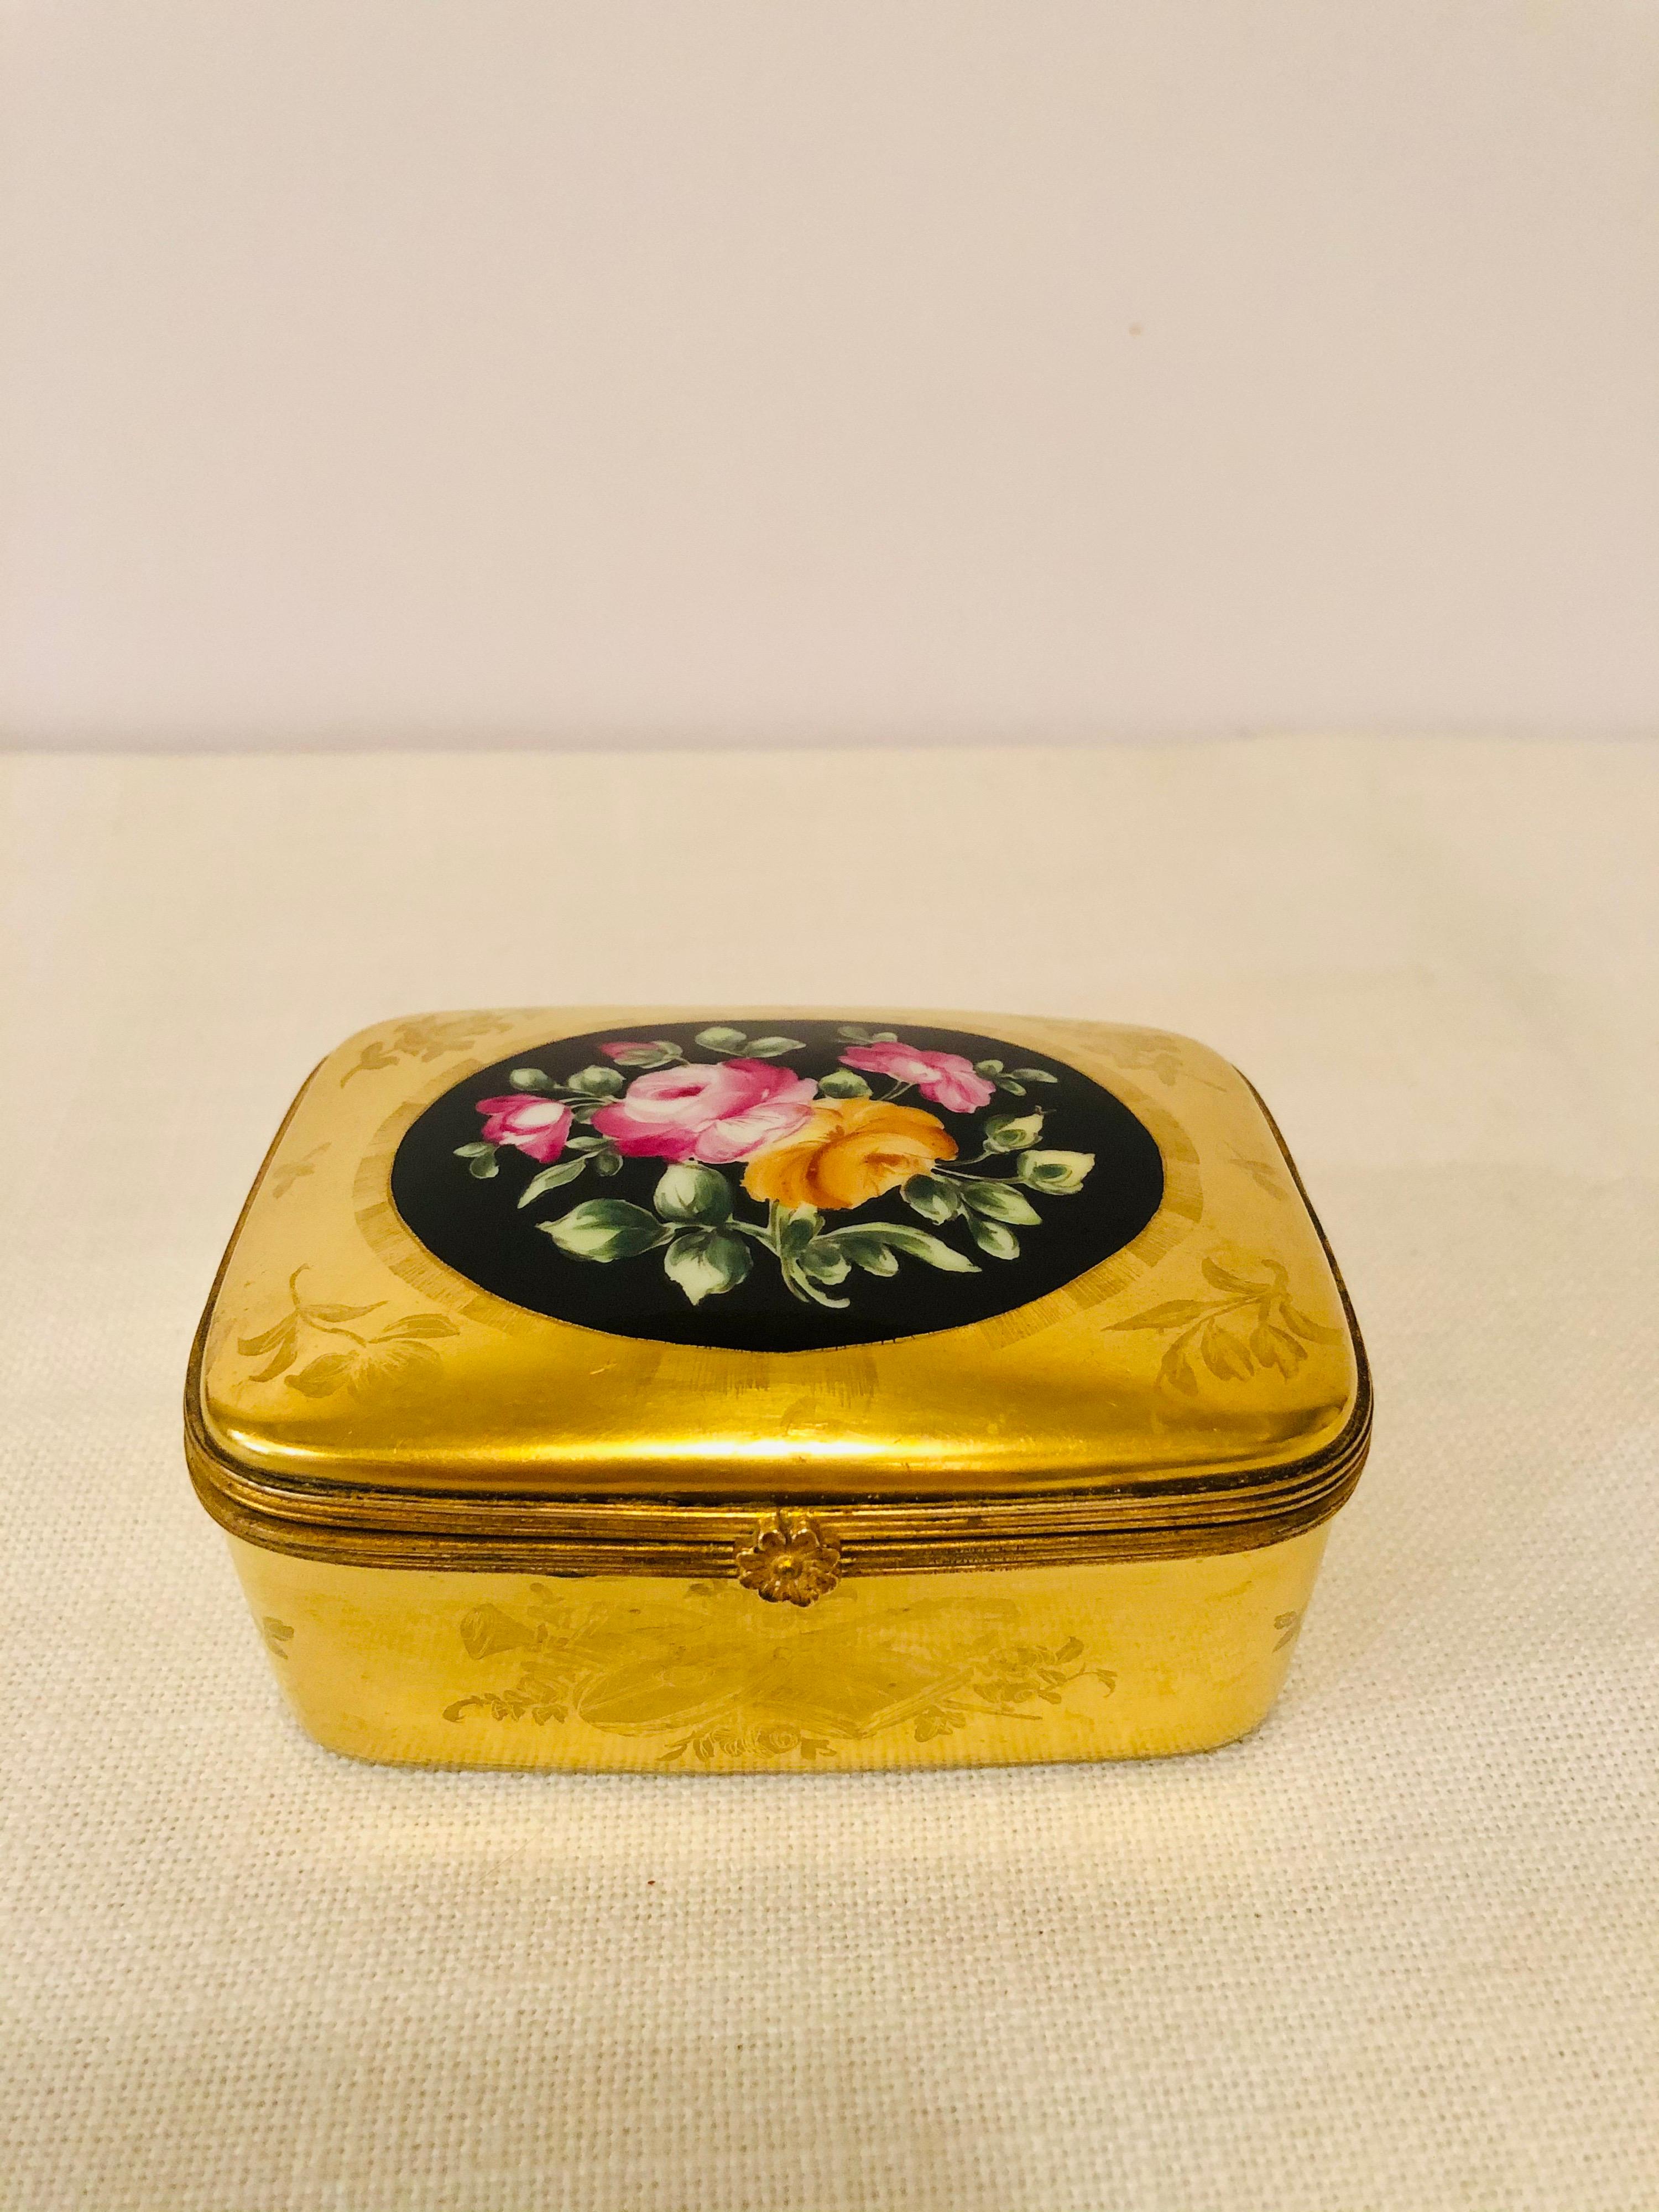 Le Tallec Box with a Gold BackGround and a Central Painting of a Flower Bouquet 7